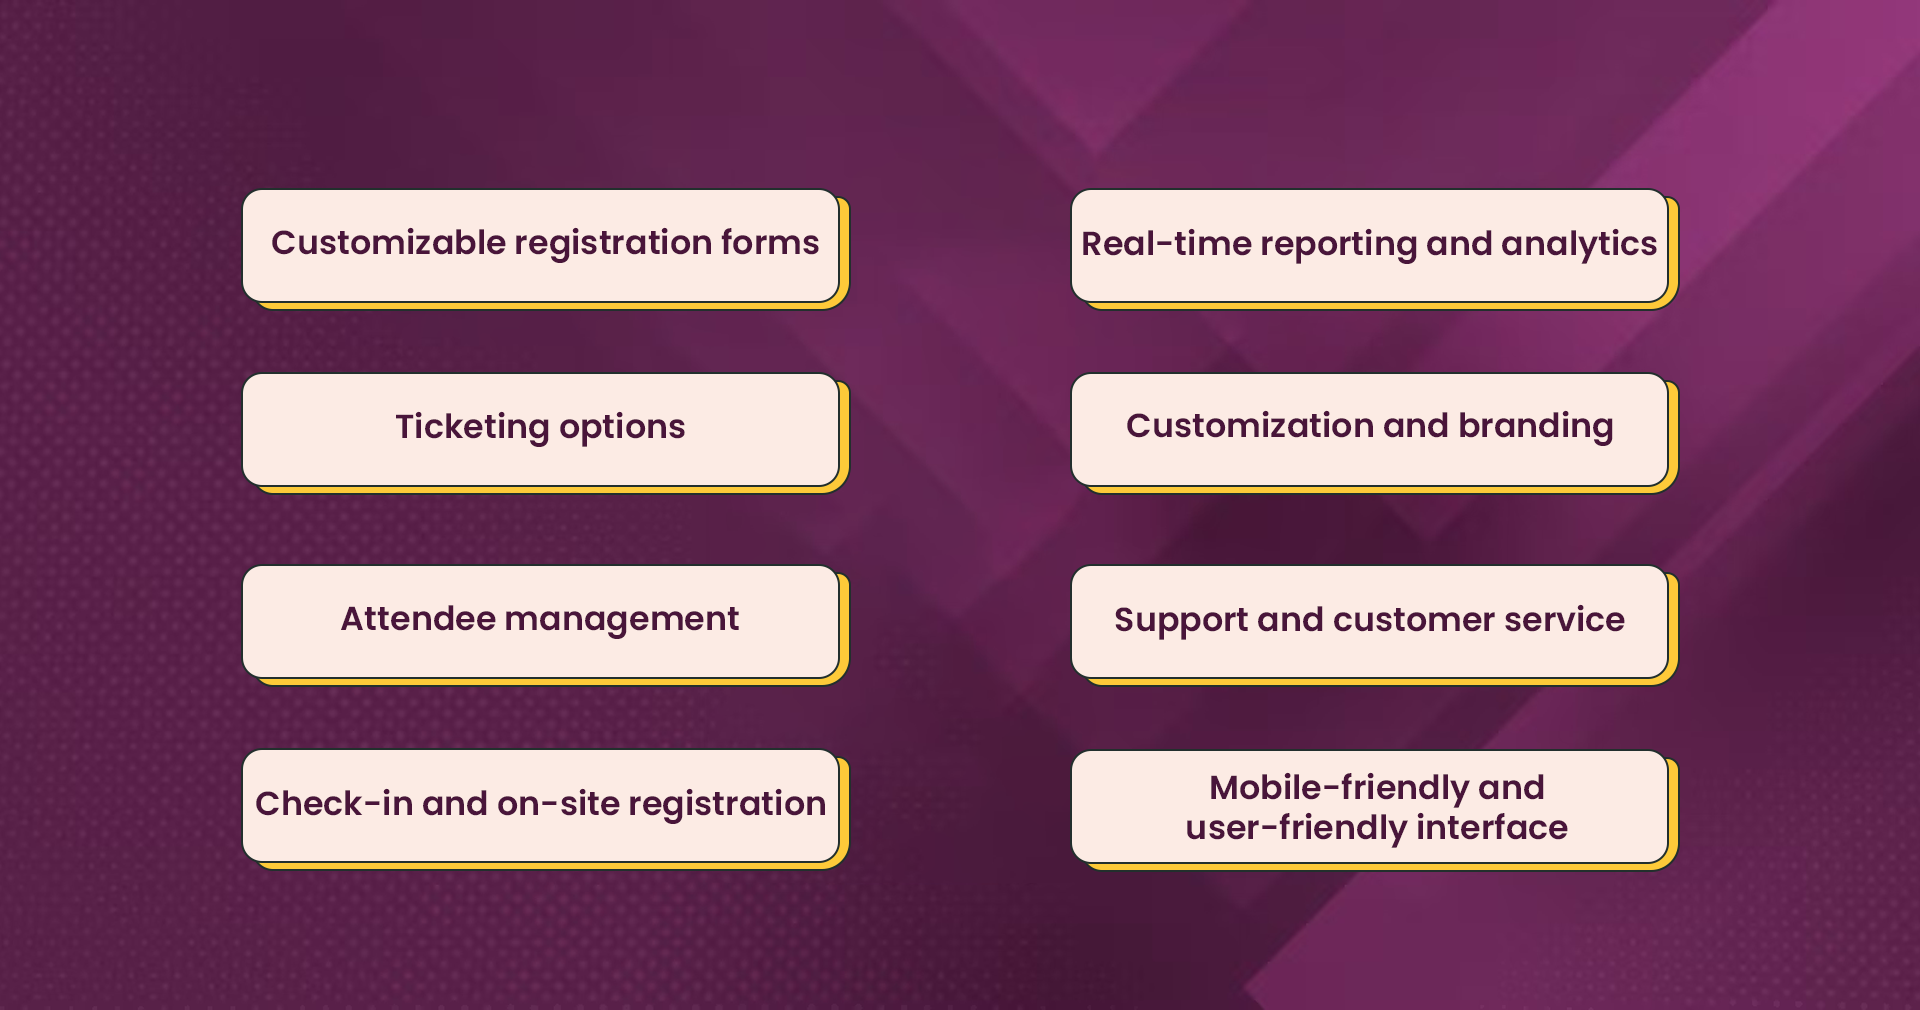 Key features to look for in an event registration software